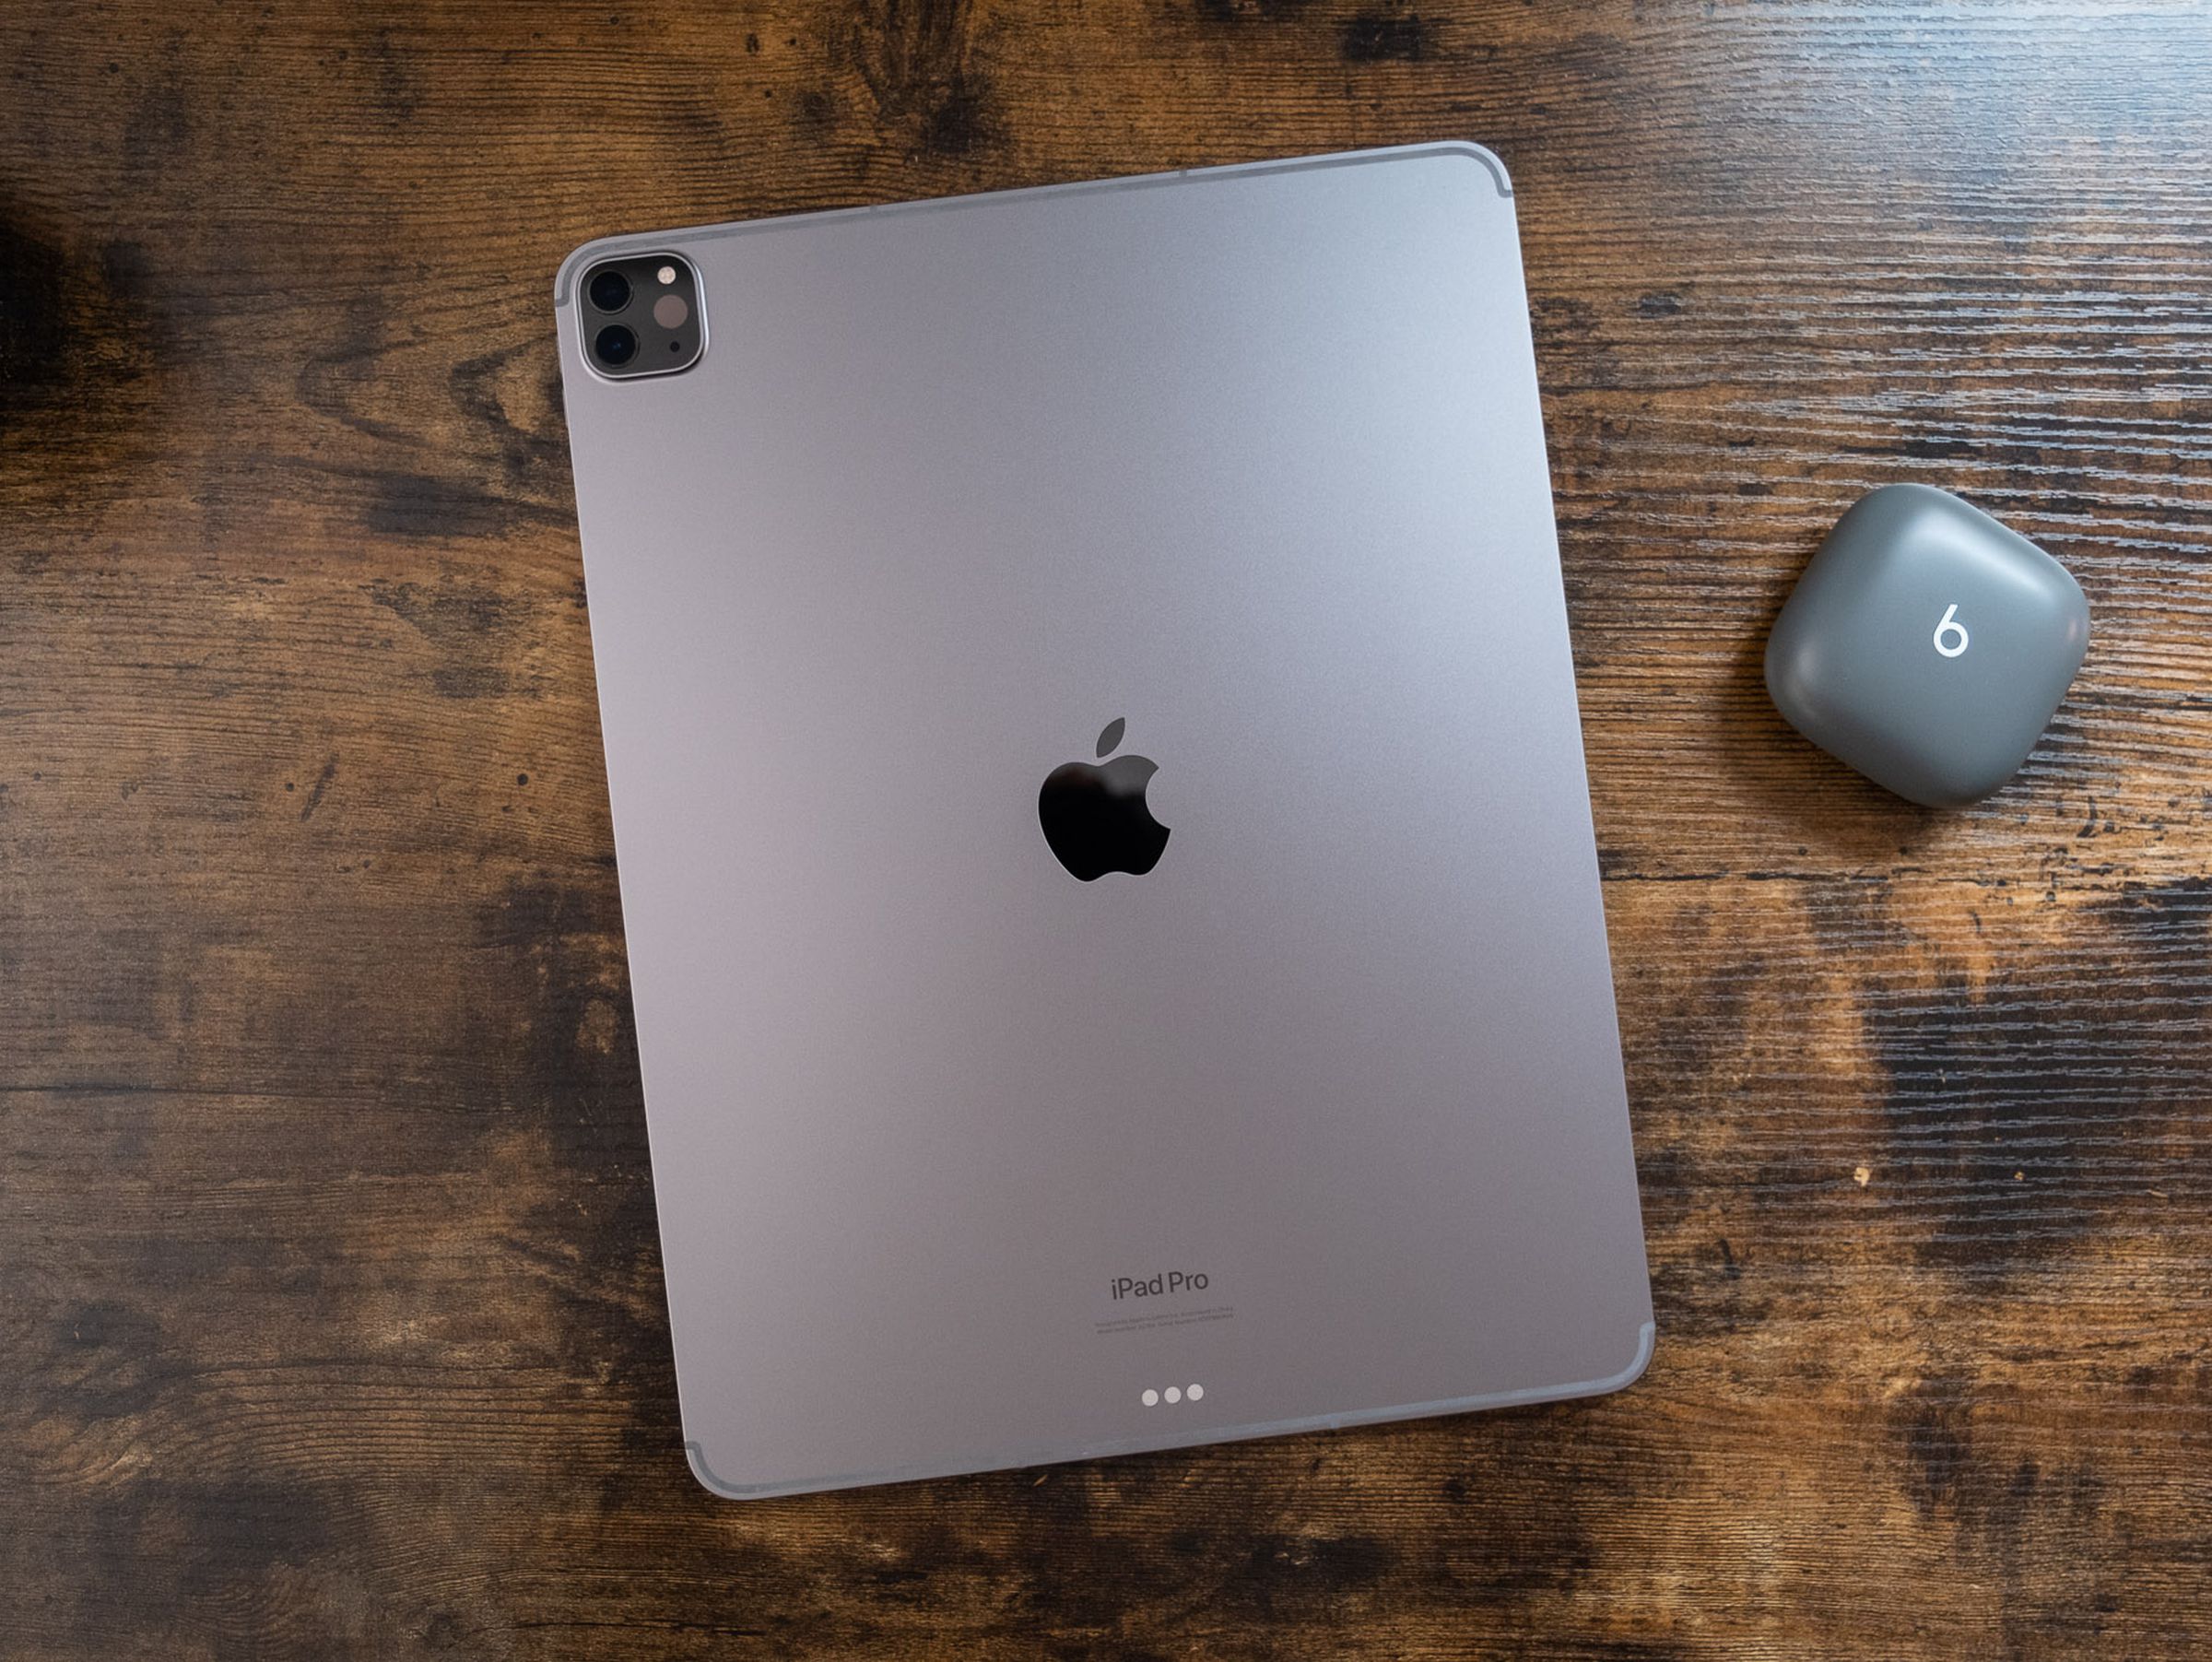 A 12.9-inch space gray iPad Pro face down on a wooden table, viewed from the top down.